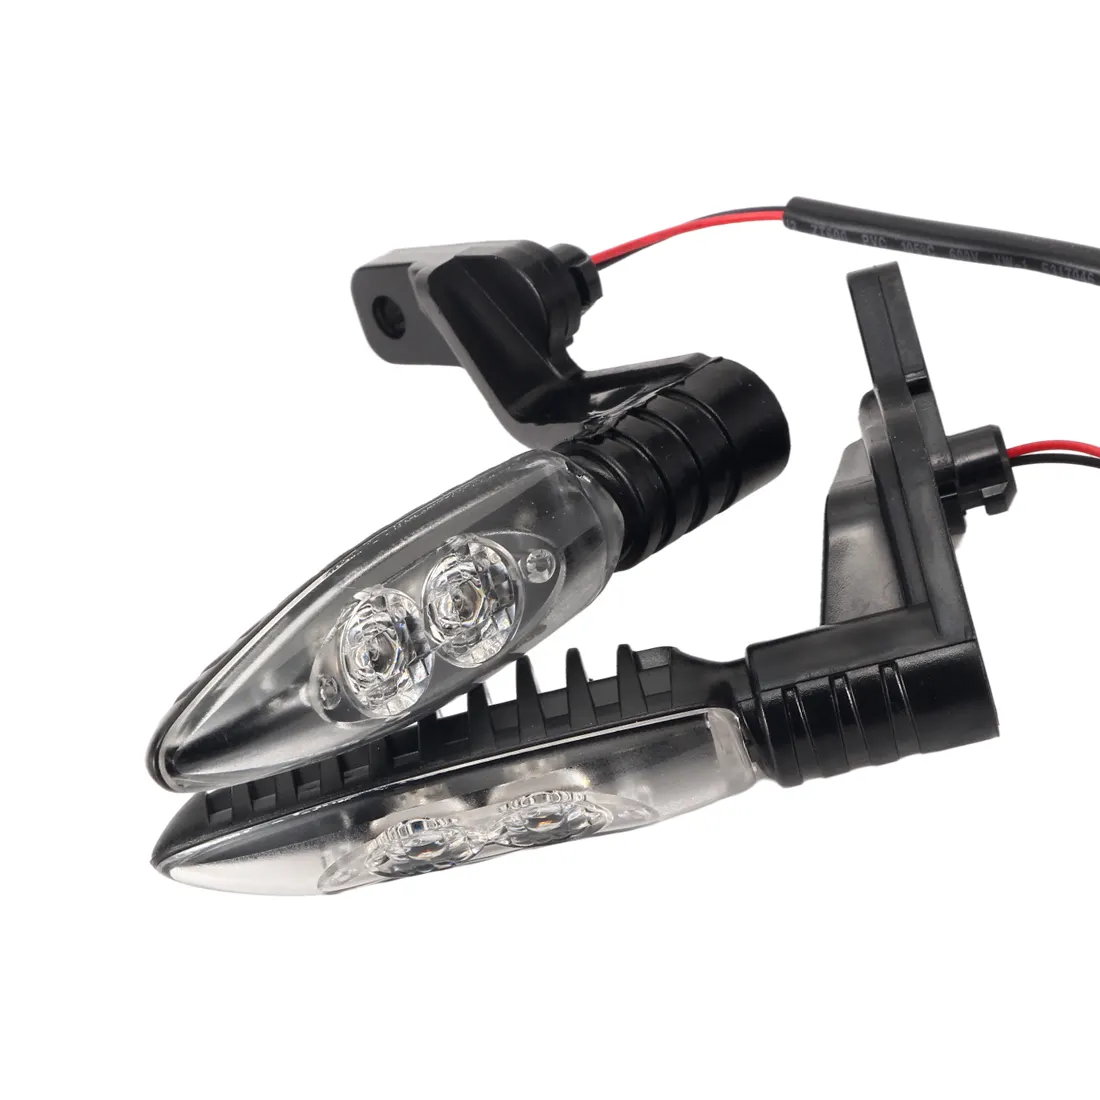 Motorcycle Lighting System Turn Signal Indicator Light for BMW C 600 SPORT 2012- (0131) F 650 GS (TWIN) 2008-2012 (0218)